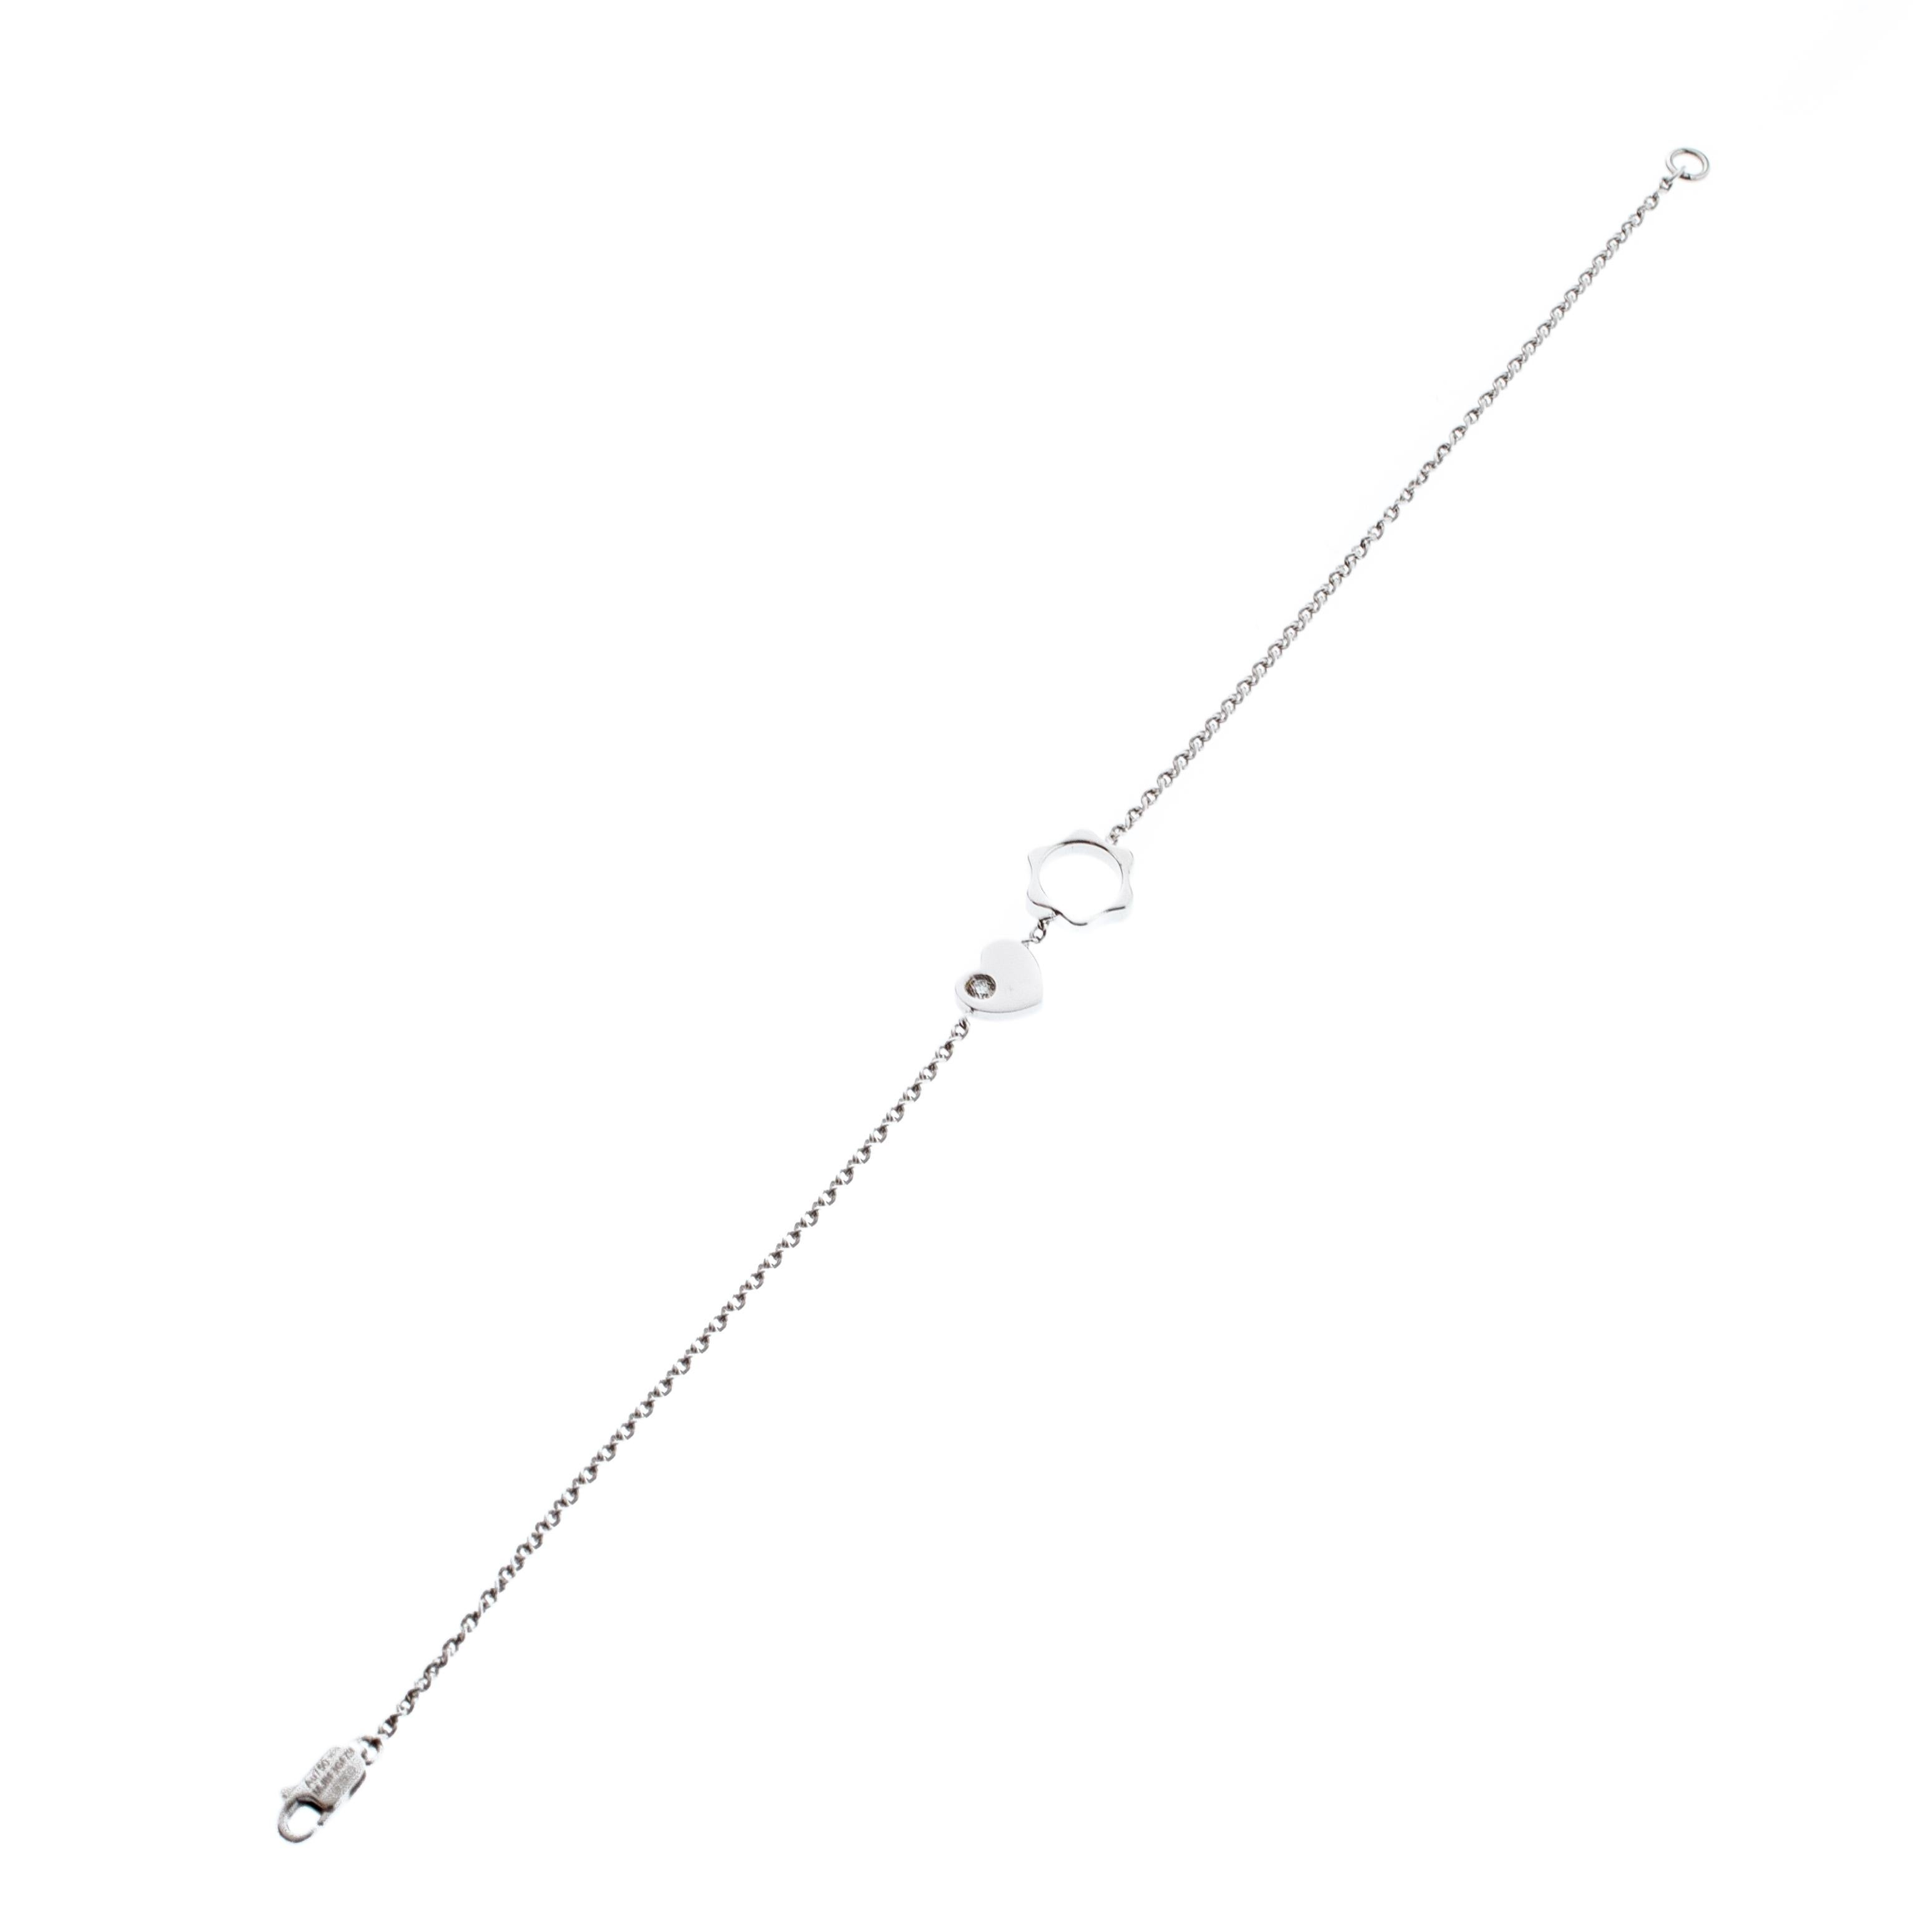 This lovely Montblanc bracelet is one accessory you will definitely love owning. Crafted from 18k white gold metal, this piece flaunts a diamond embellished heart and the brand's star logo attached side by side to gracefully highlight your